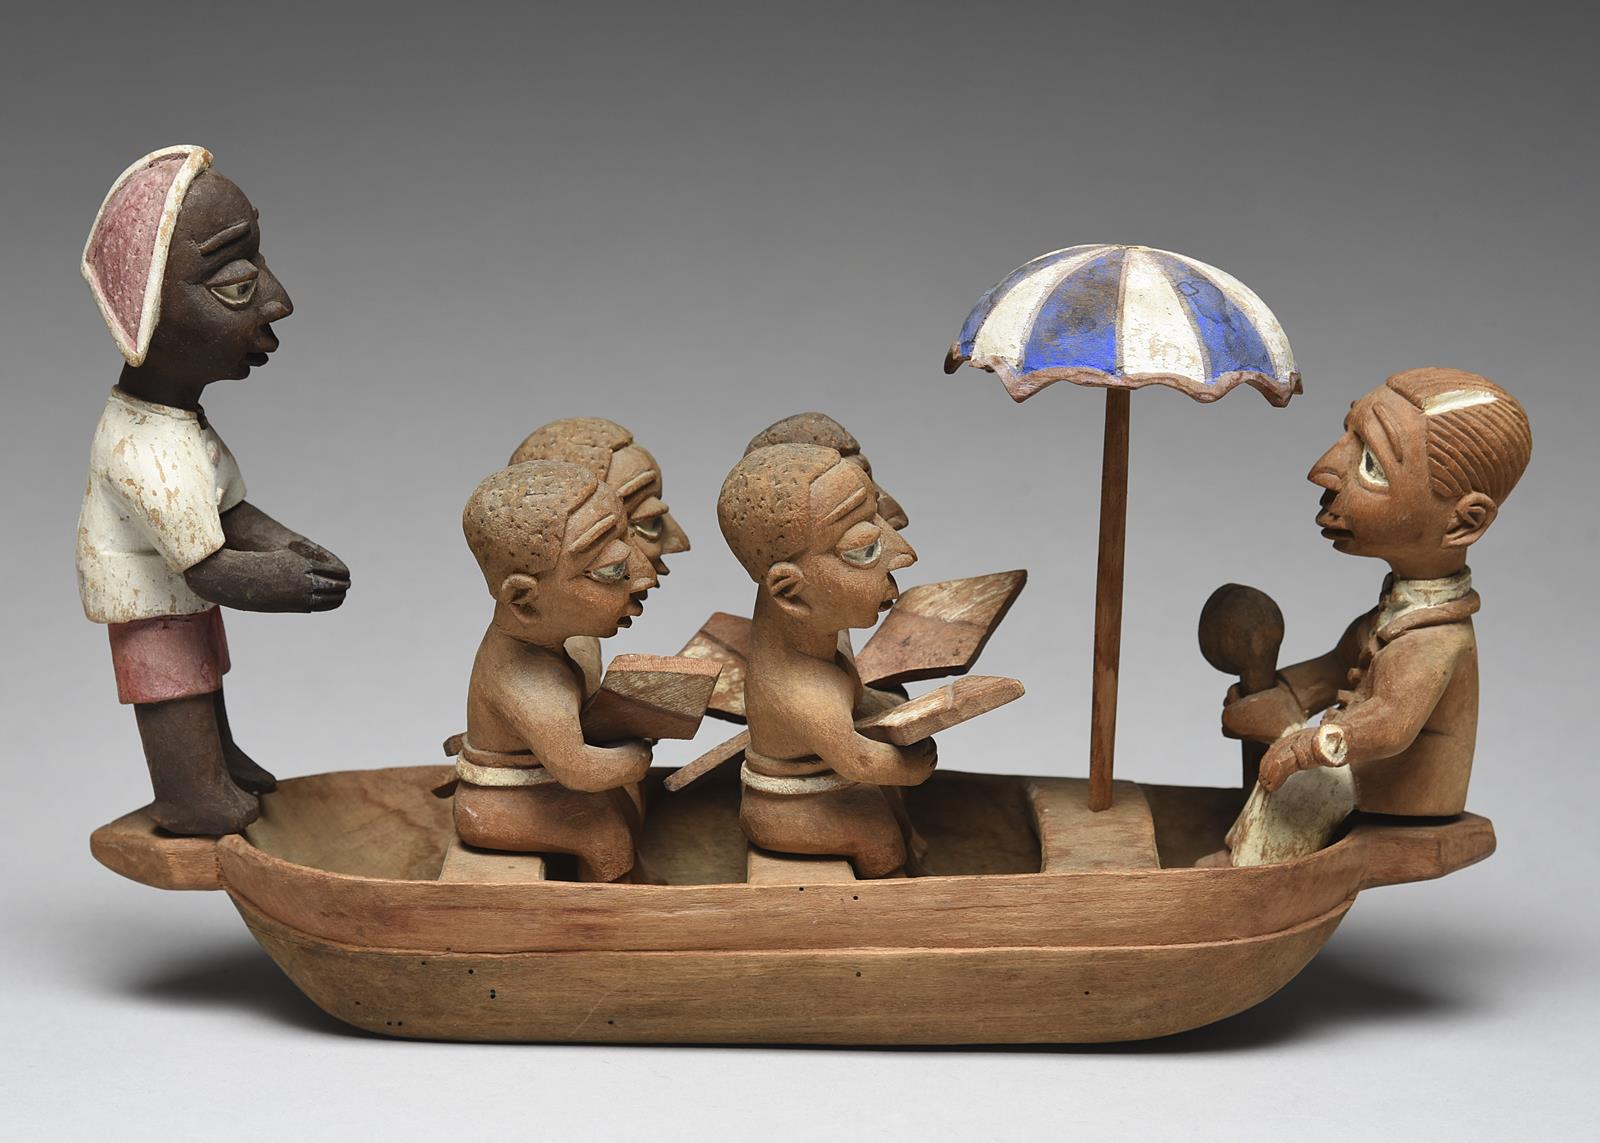 A Yoruba boat group by Thomas Ona Nigeria with a tiller man, four oarsmen with oars, an umbrella and